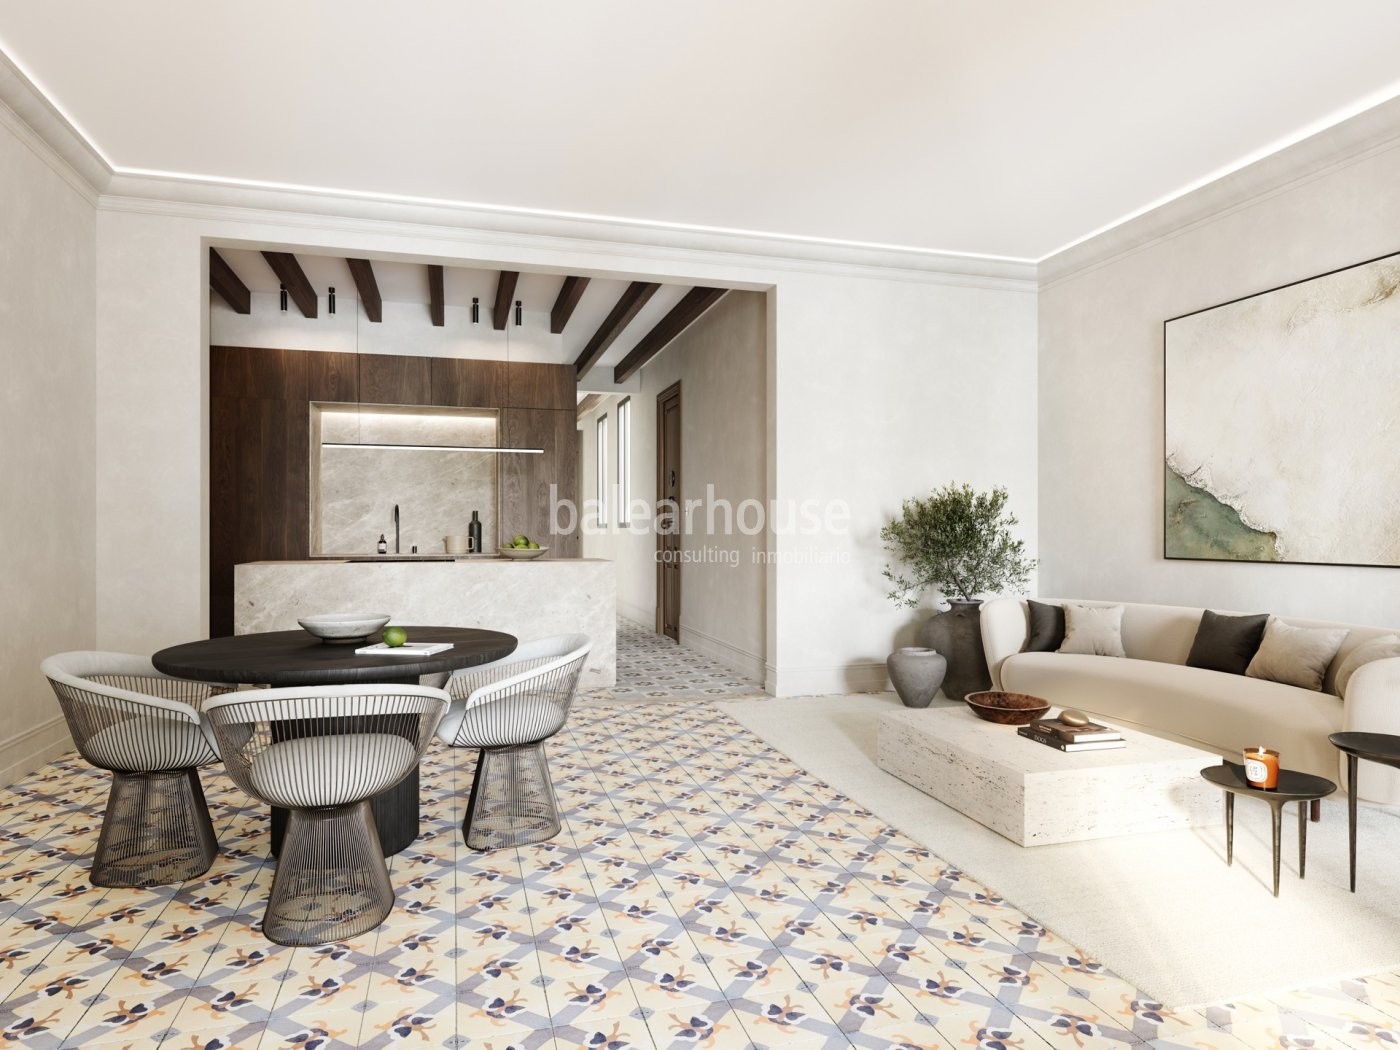 Brand new grand spacious luxury apartment in an iconic, historic building in downtown Palma.